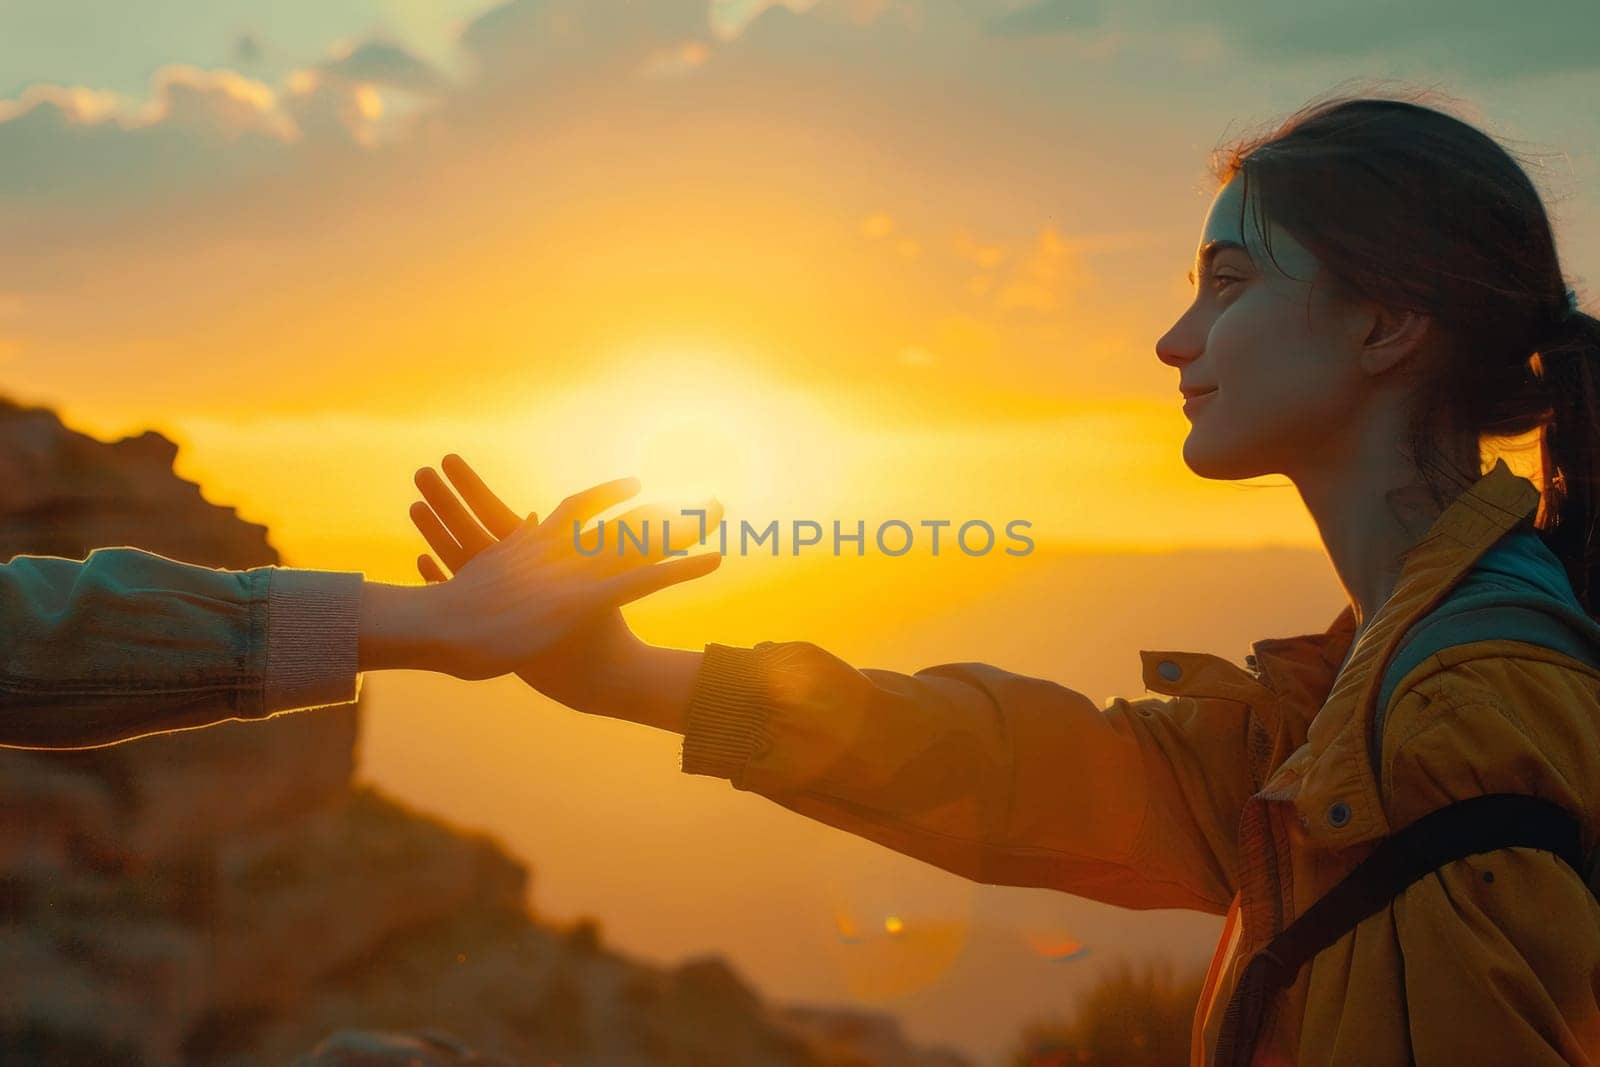 An emotive image depicting one person extending a hand to another against a sunset, symbolizing companionship and support.